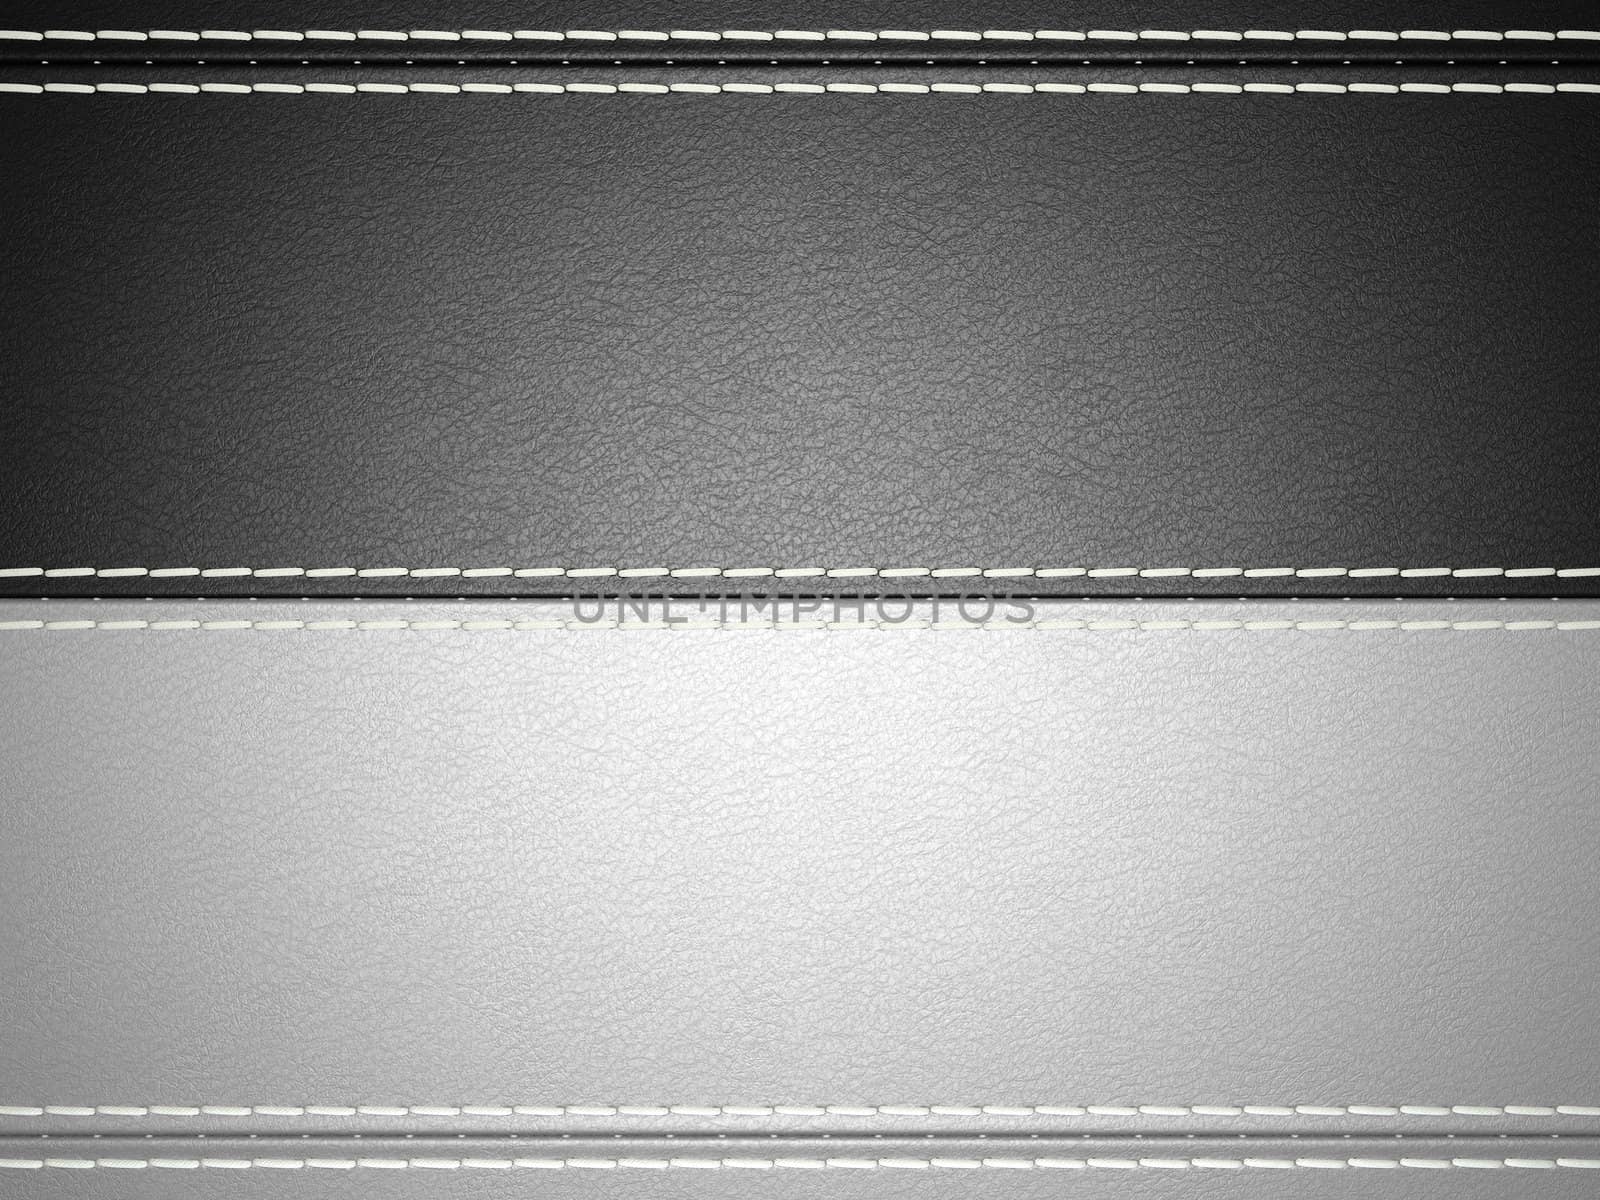 Black and grey horizontal stitched leather background. Large resolution